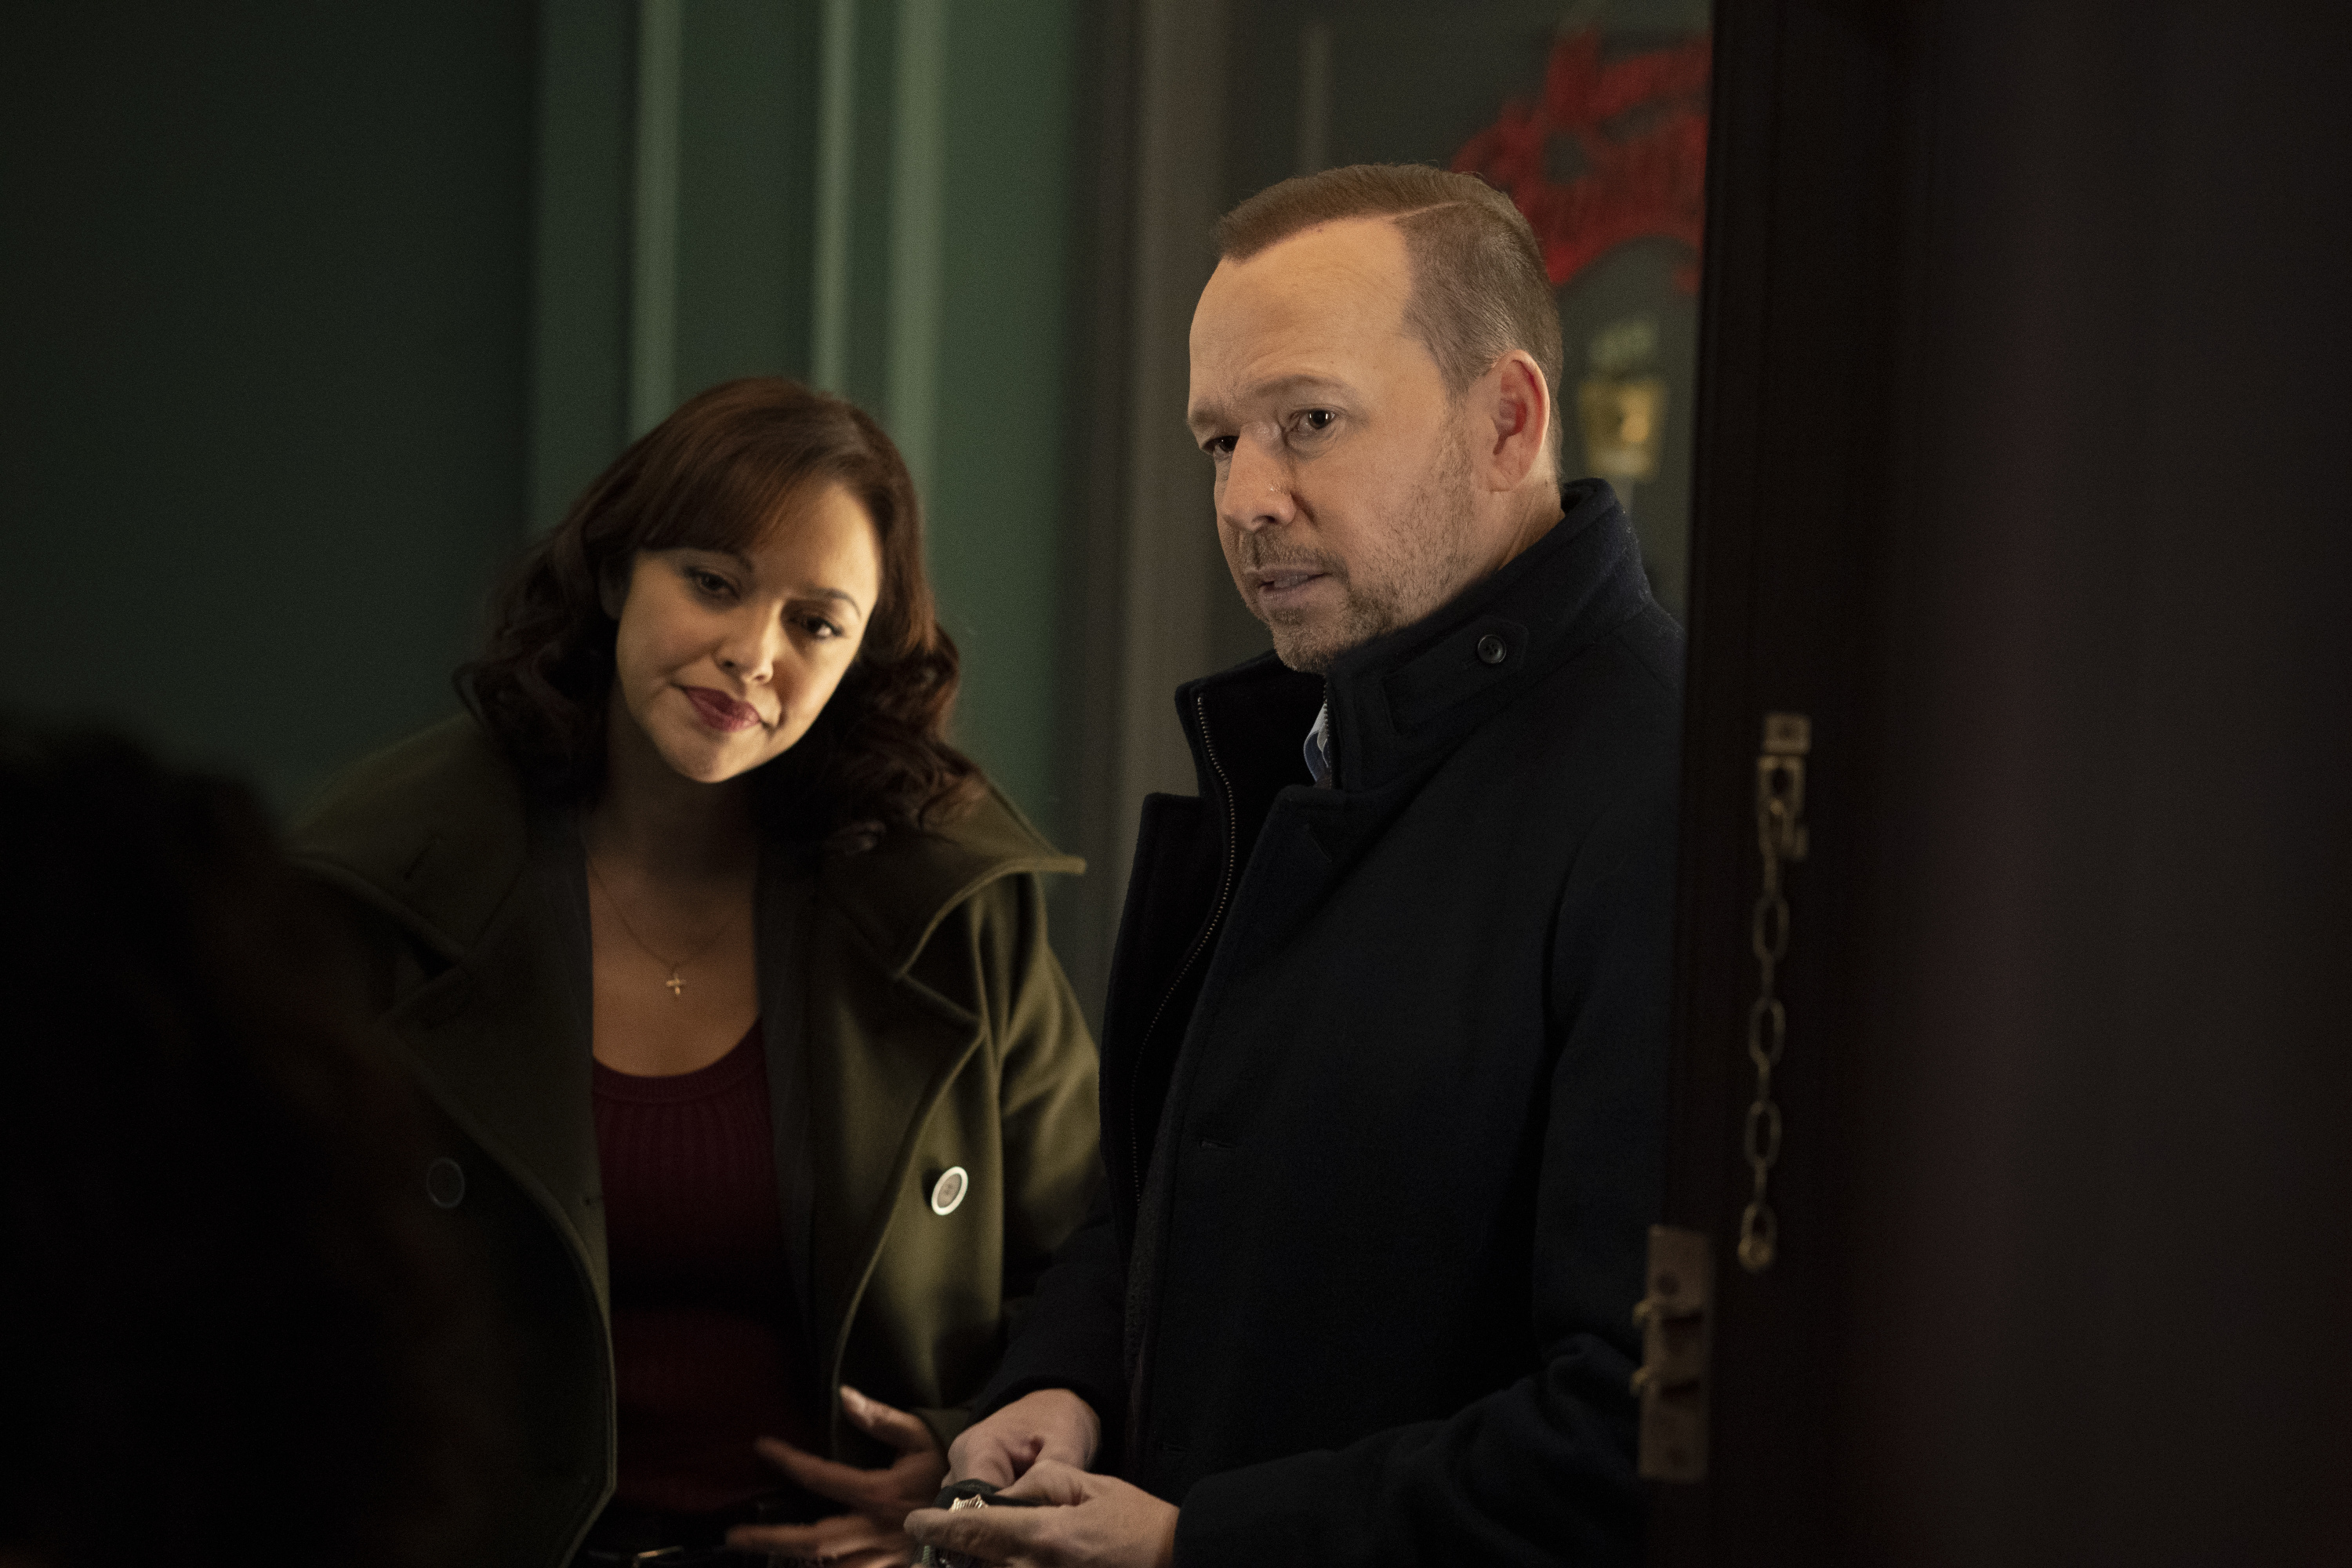 Marisa Ramirez as Maria Baez and Donnie Wahlberg as Danny Reagan on Blue Bloods | Patrick Harbron/CBS via Getty Images